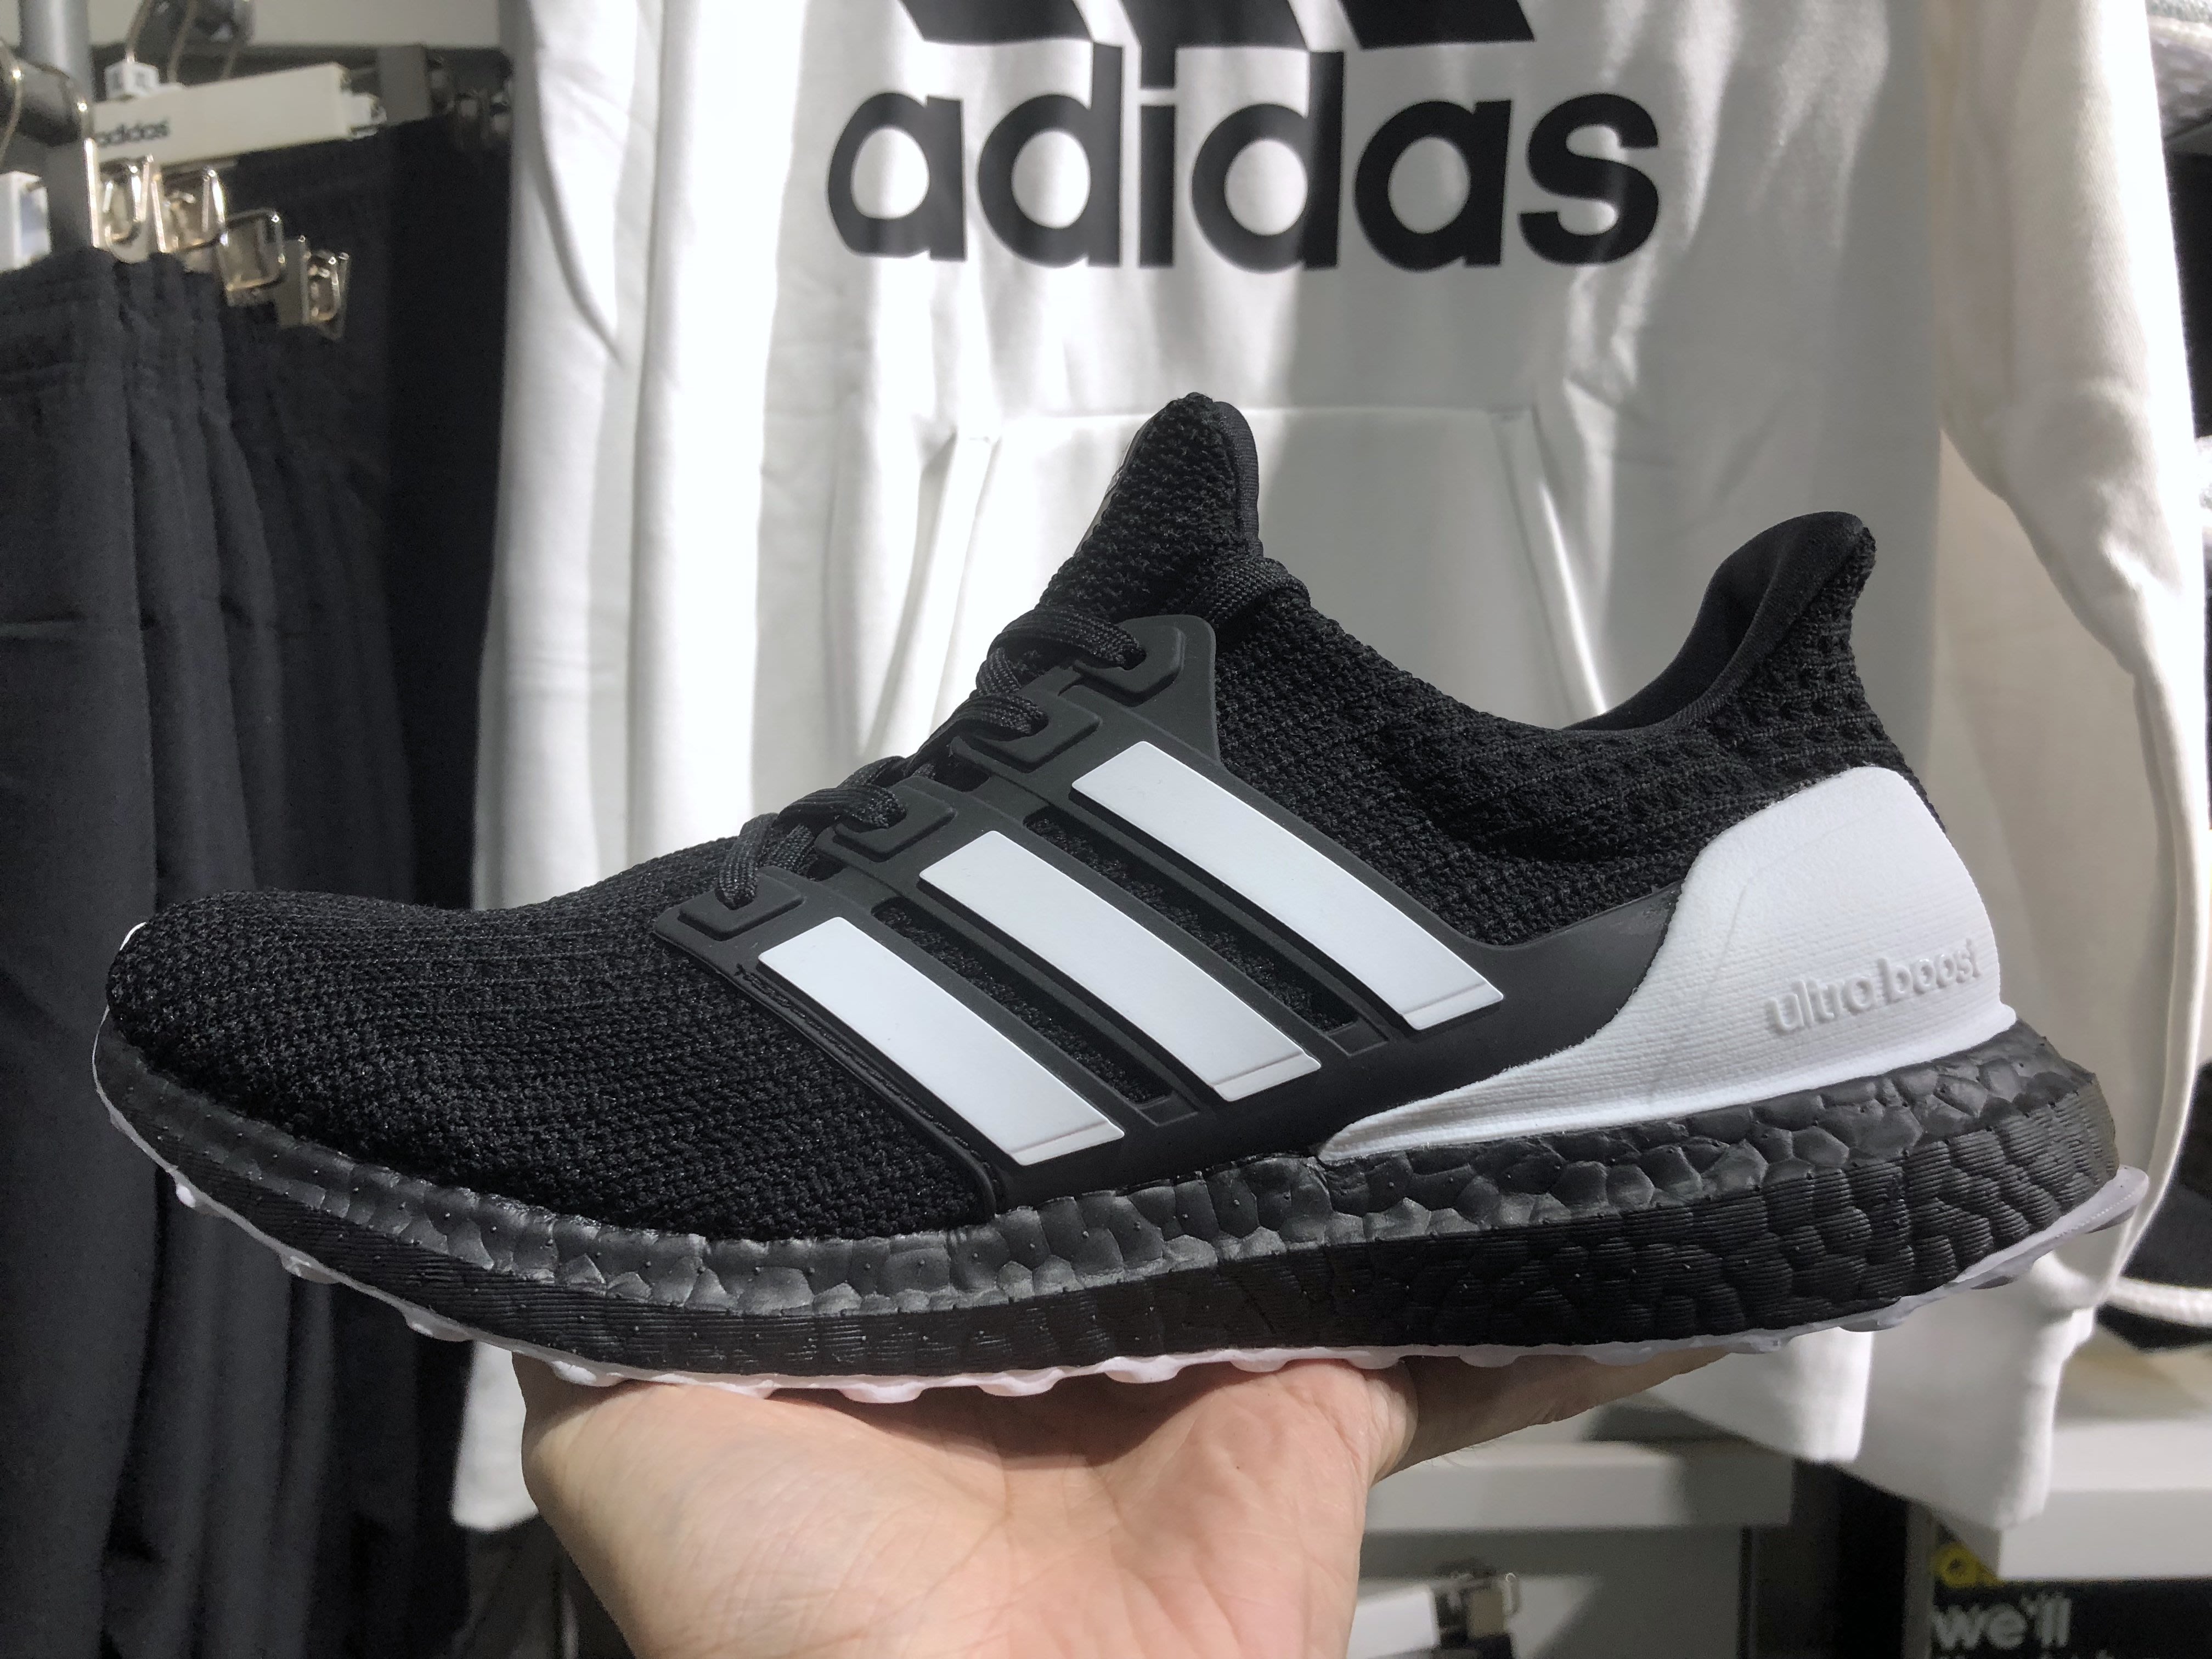 THE NEW ADIDAS ULTRABOOST 2019 ARE TERRIBLE